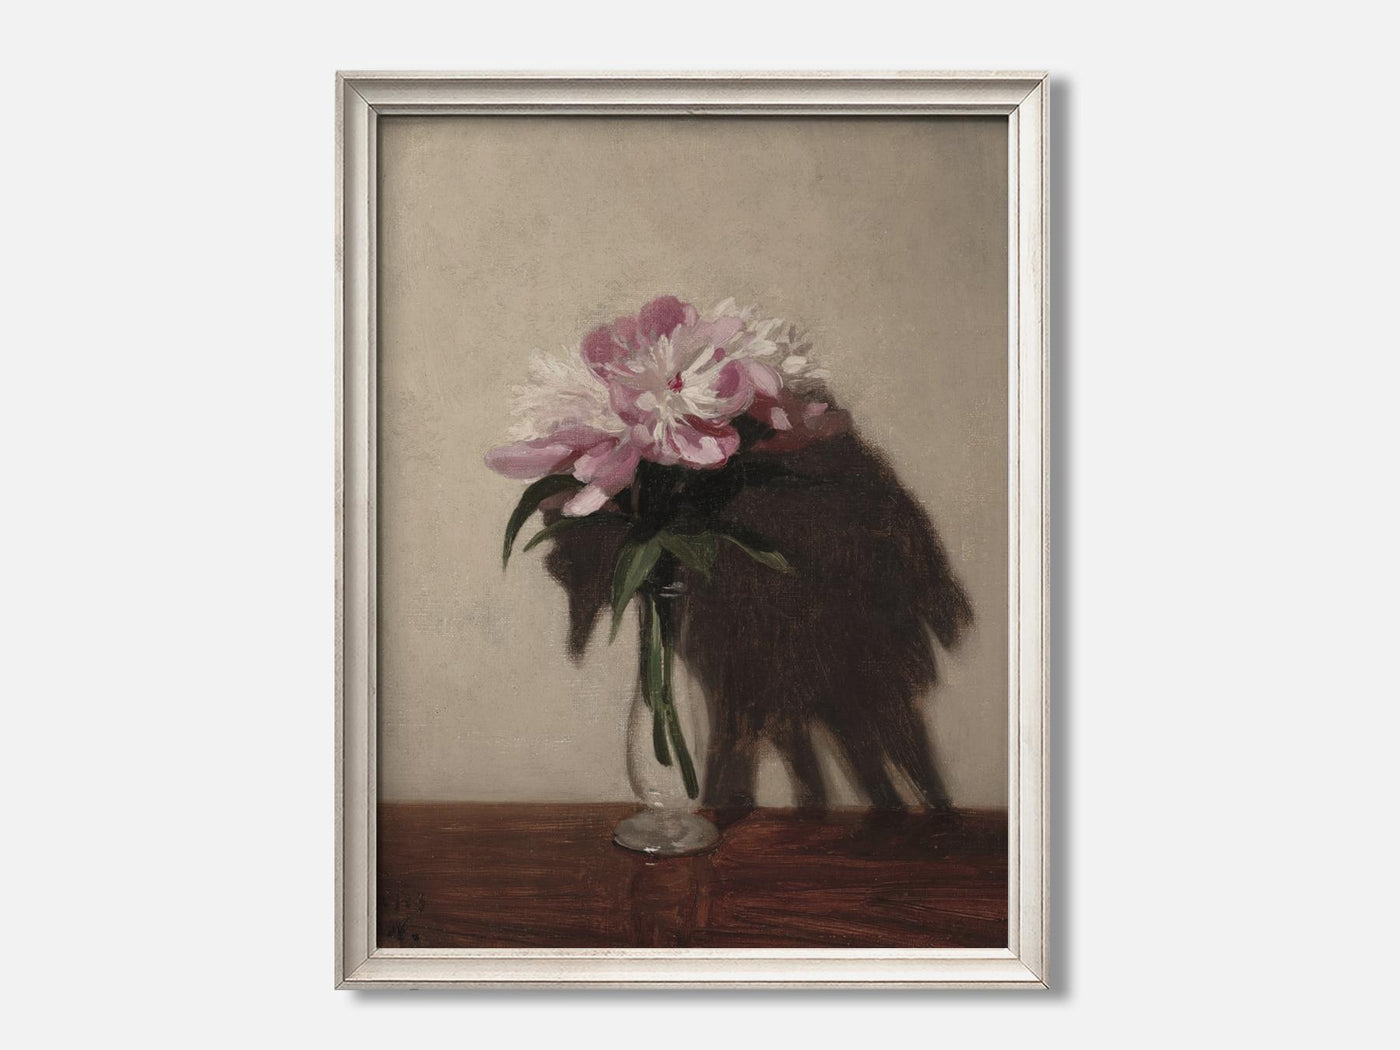 Vase with Pink Peonies mockup - A_spr10-V1-PC_F+O-SS_1-PS_5x7-C_def variant